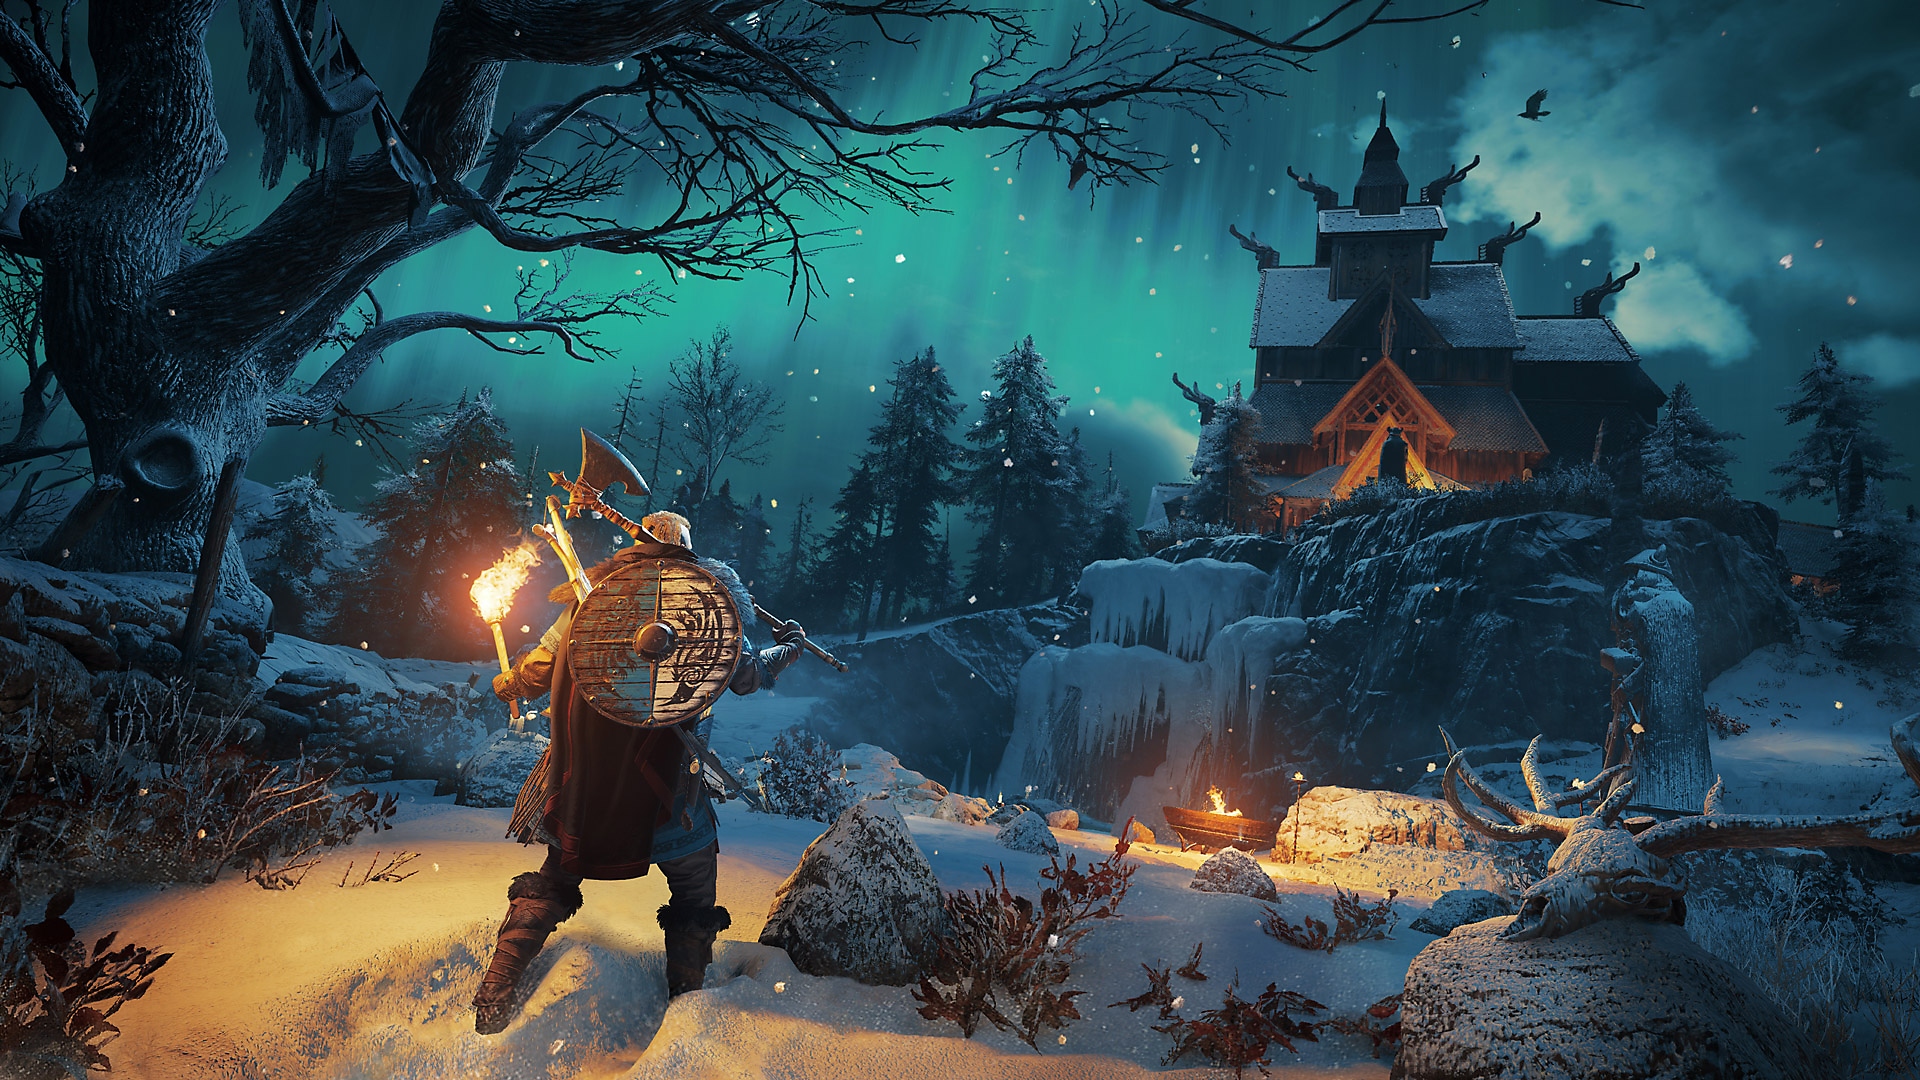 Assassin's Creed Valhalla screenshot showing main character holding axe over shoulder looking up at Northern Lights in the sky